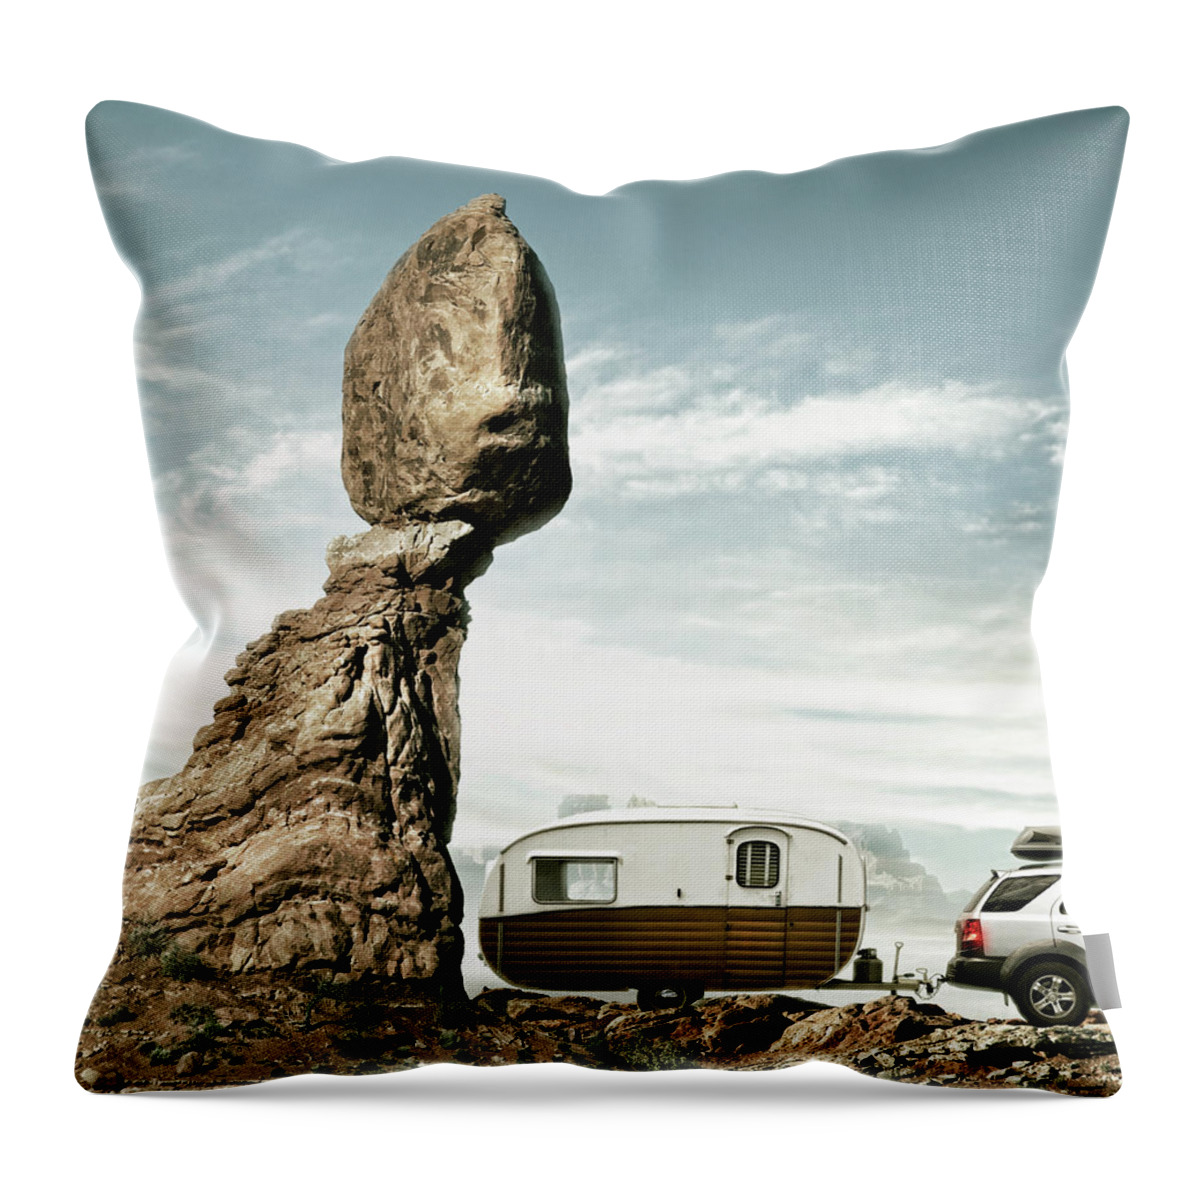 Camping Throw Pillow featuring the photograph Careless Camping by Colin Anderson